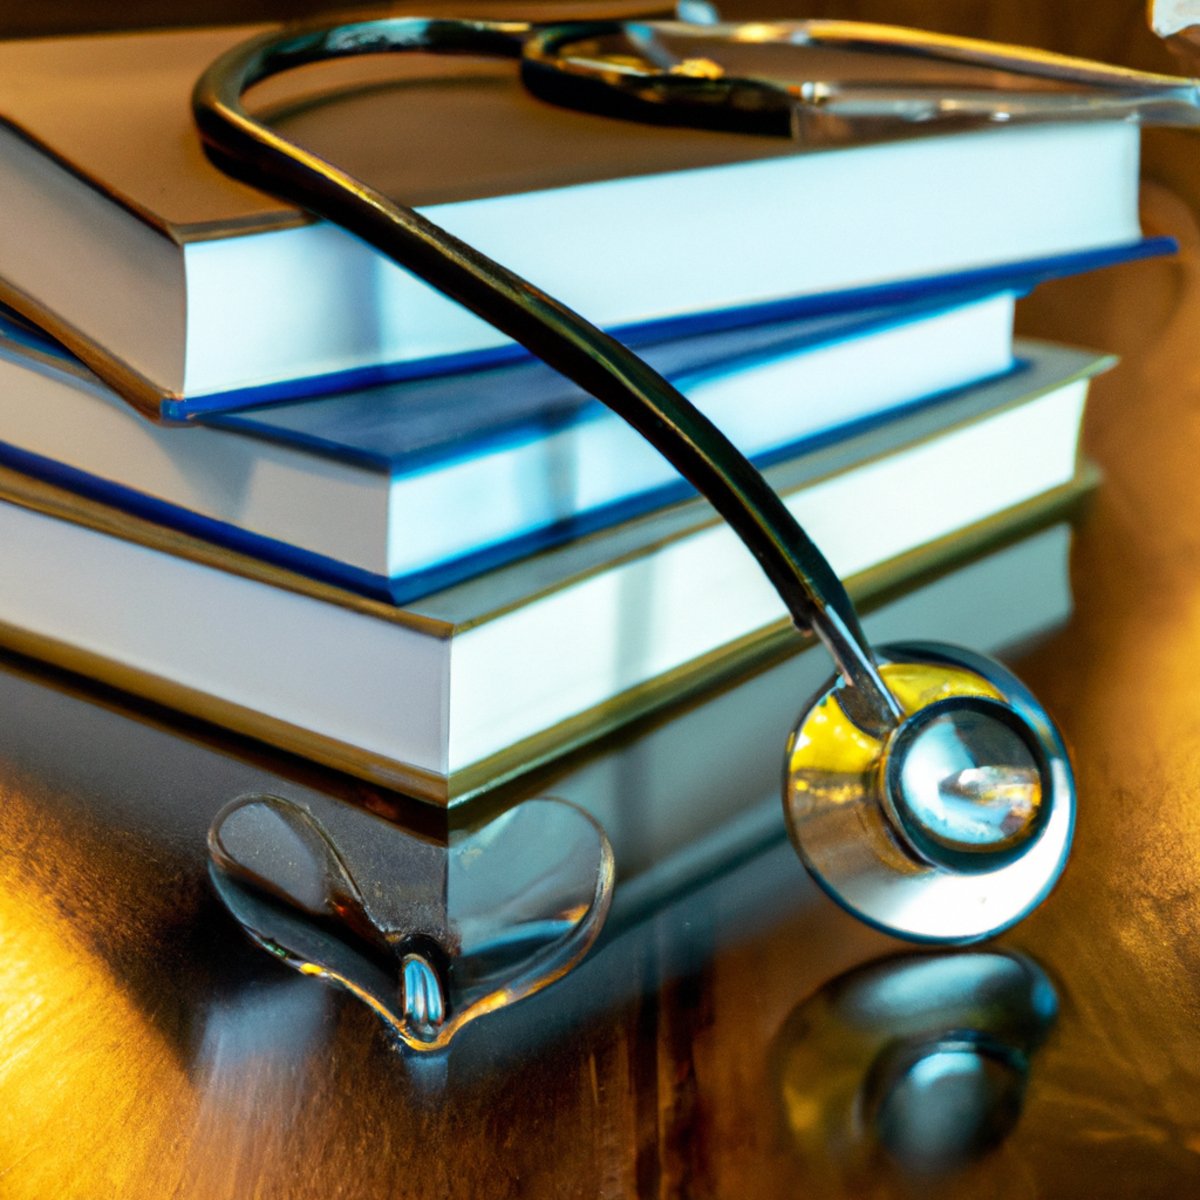 Stethoscope, textbooks, and heart-shaped paperweight on table, representing medical knowledge and cardiovascular health -Kawasaki Disease